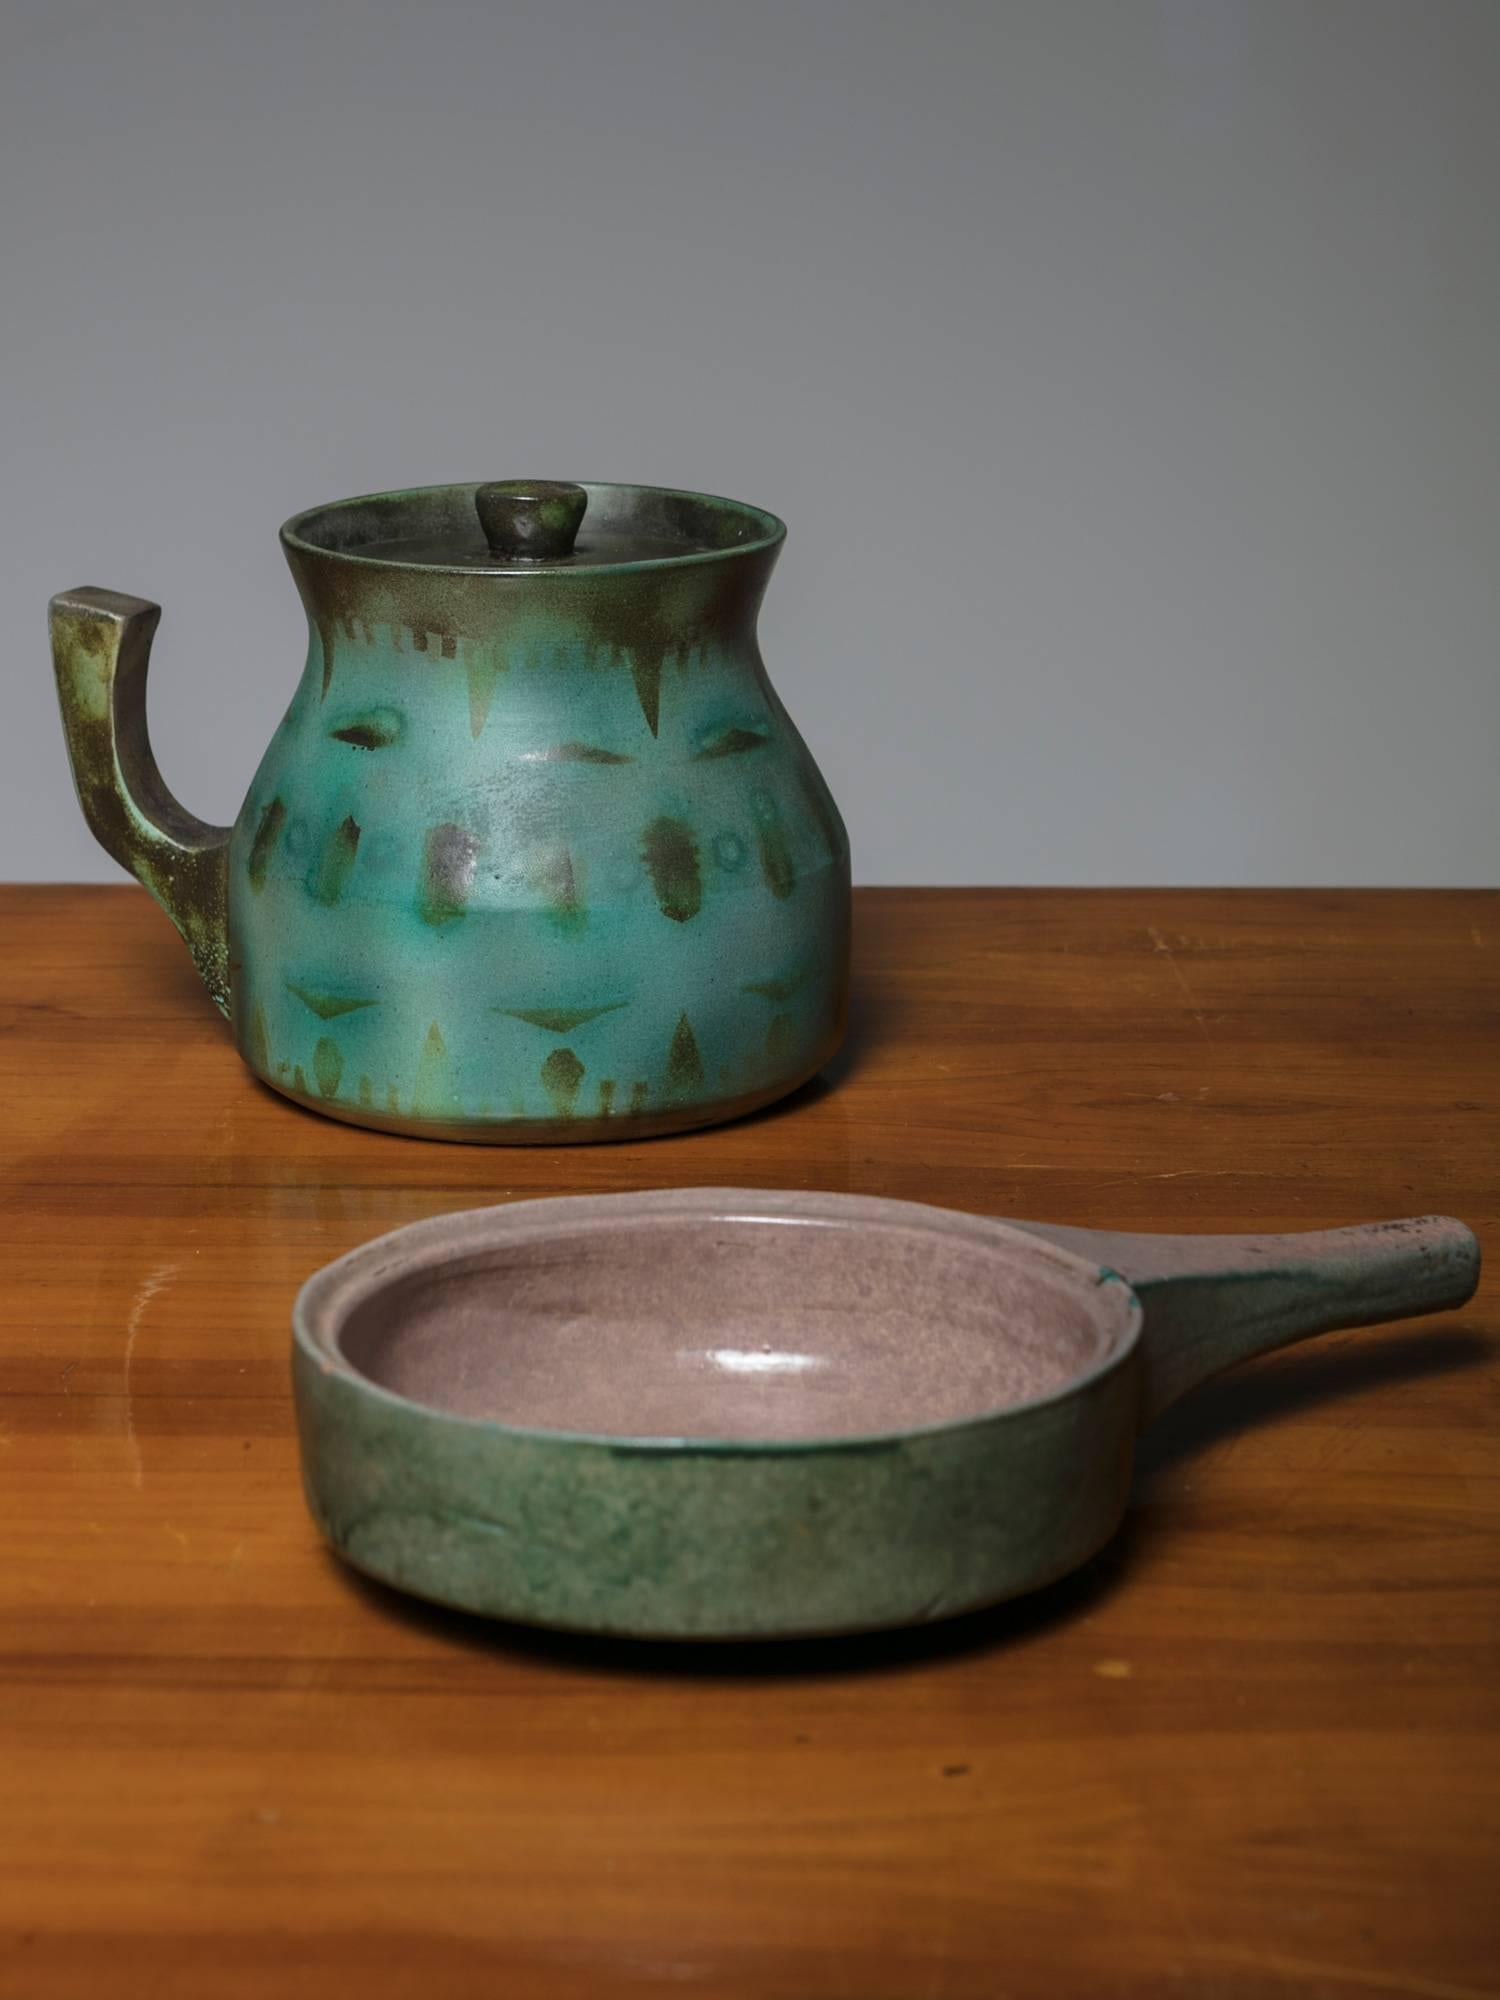 Pair of ceramic pieces manufactured in Faenza with green enamel decoration.
Size refers to the vase.